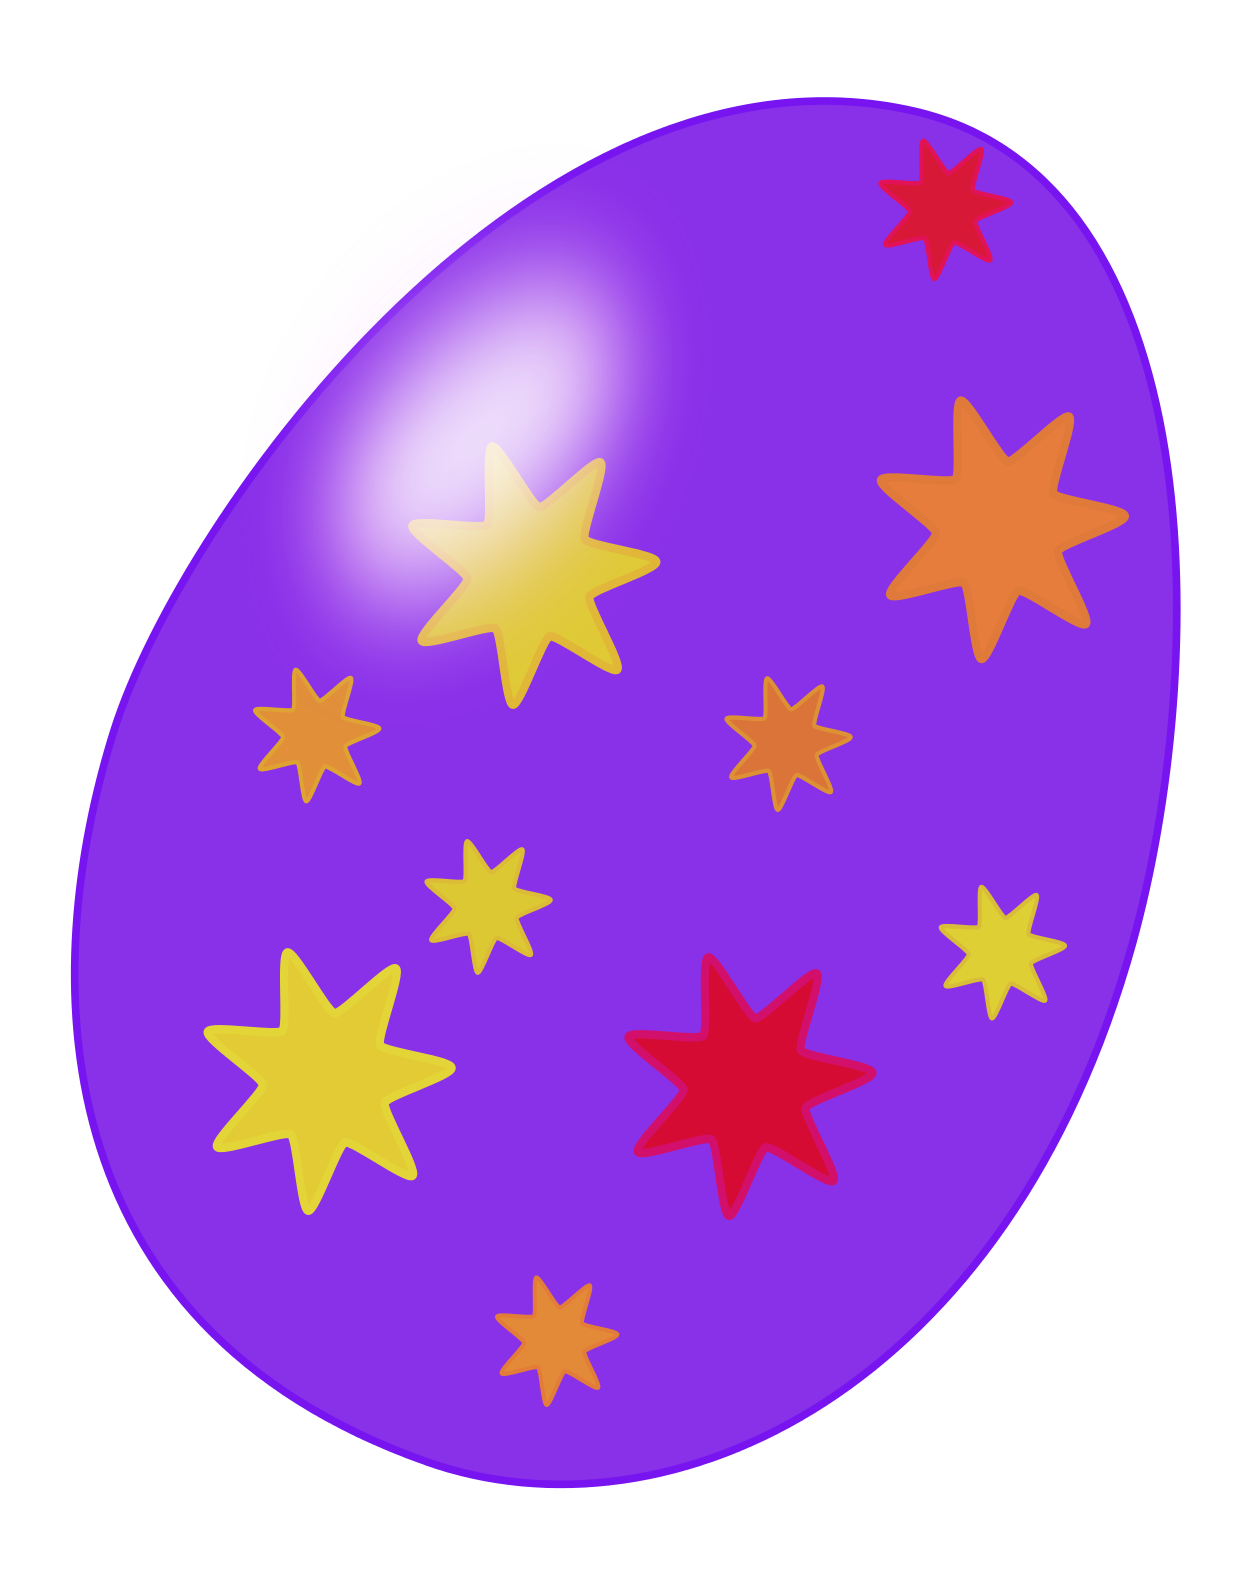 Free to Use & Public Domain Easter Eggs Clip Art